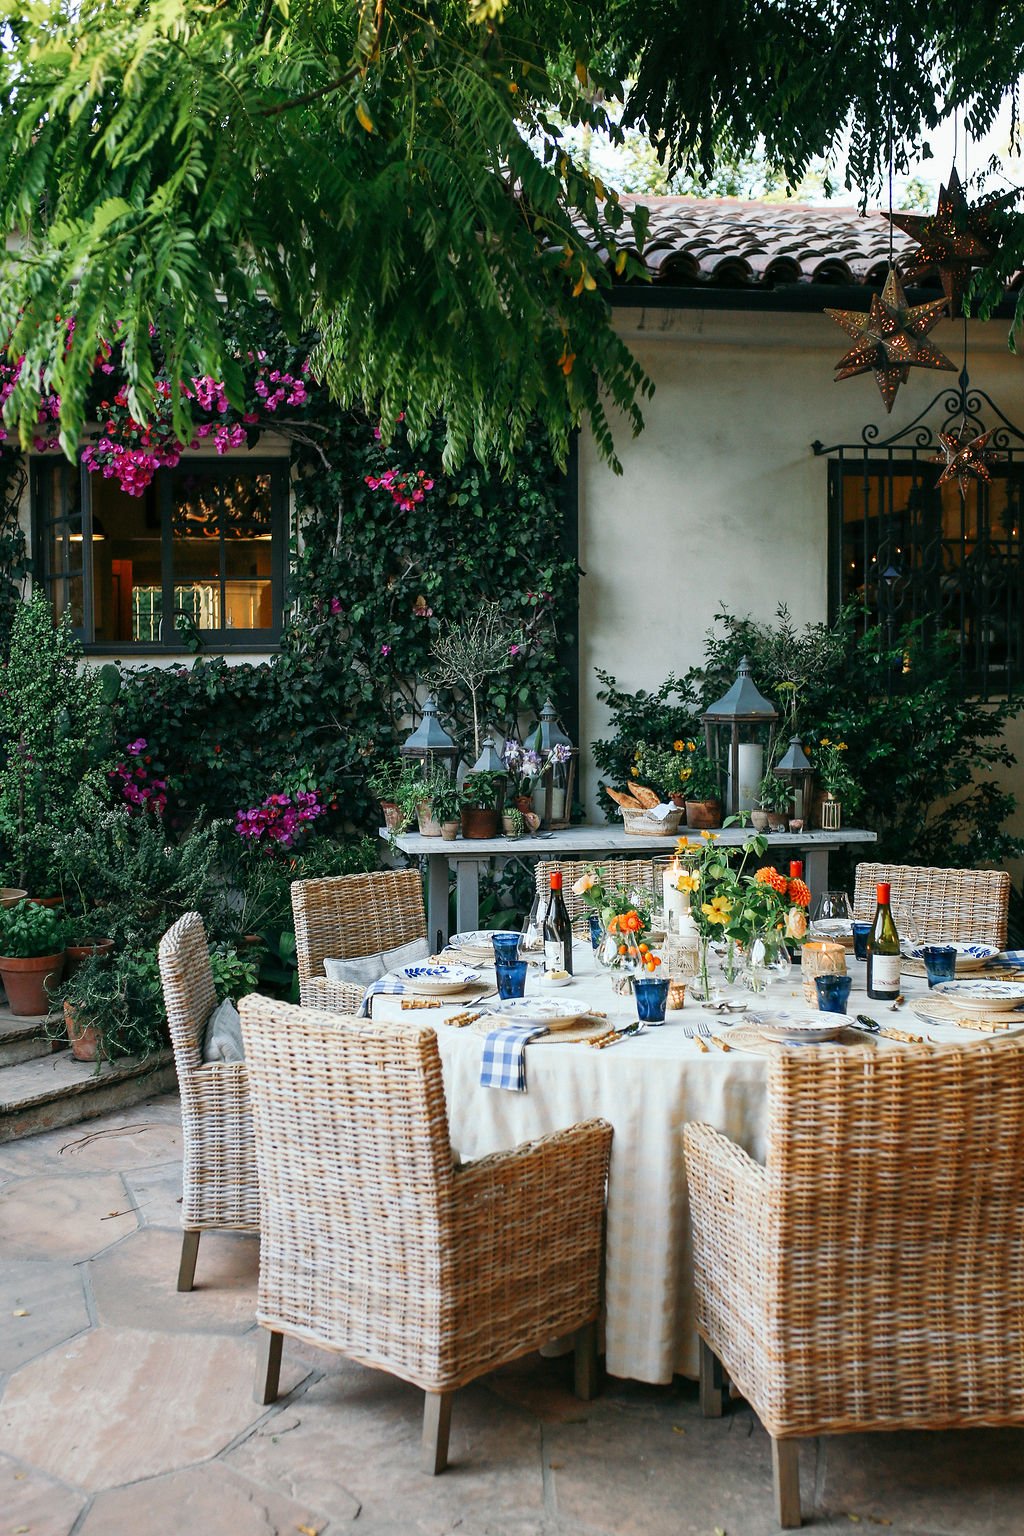 Valerie Rice dinner party in Santa Barbara, bougainvillea and mediterranean house exterior, table setting